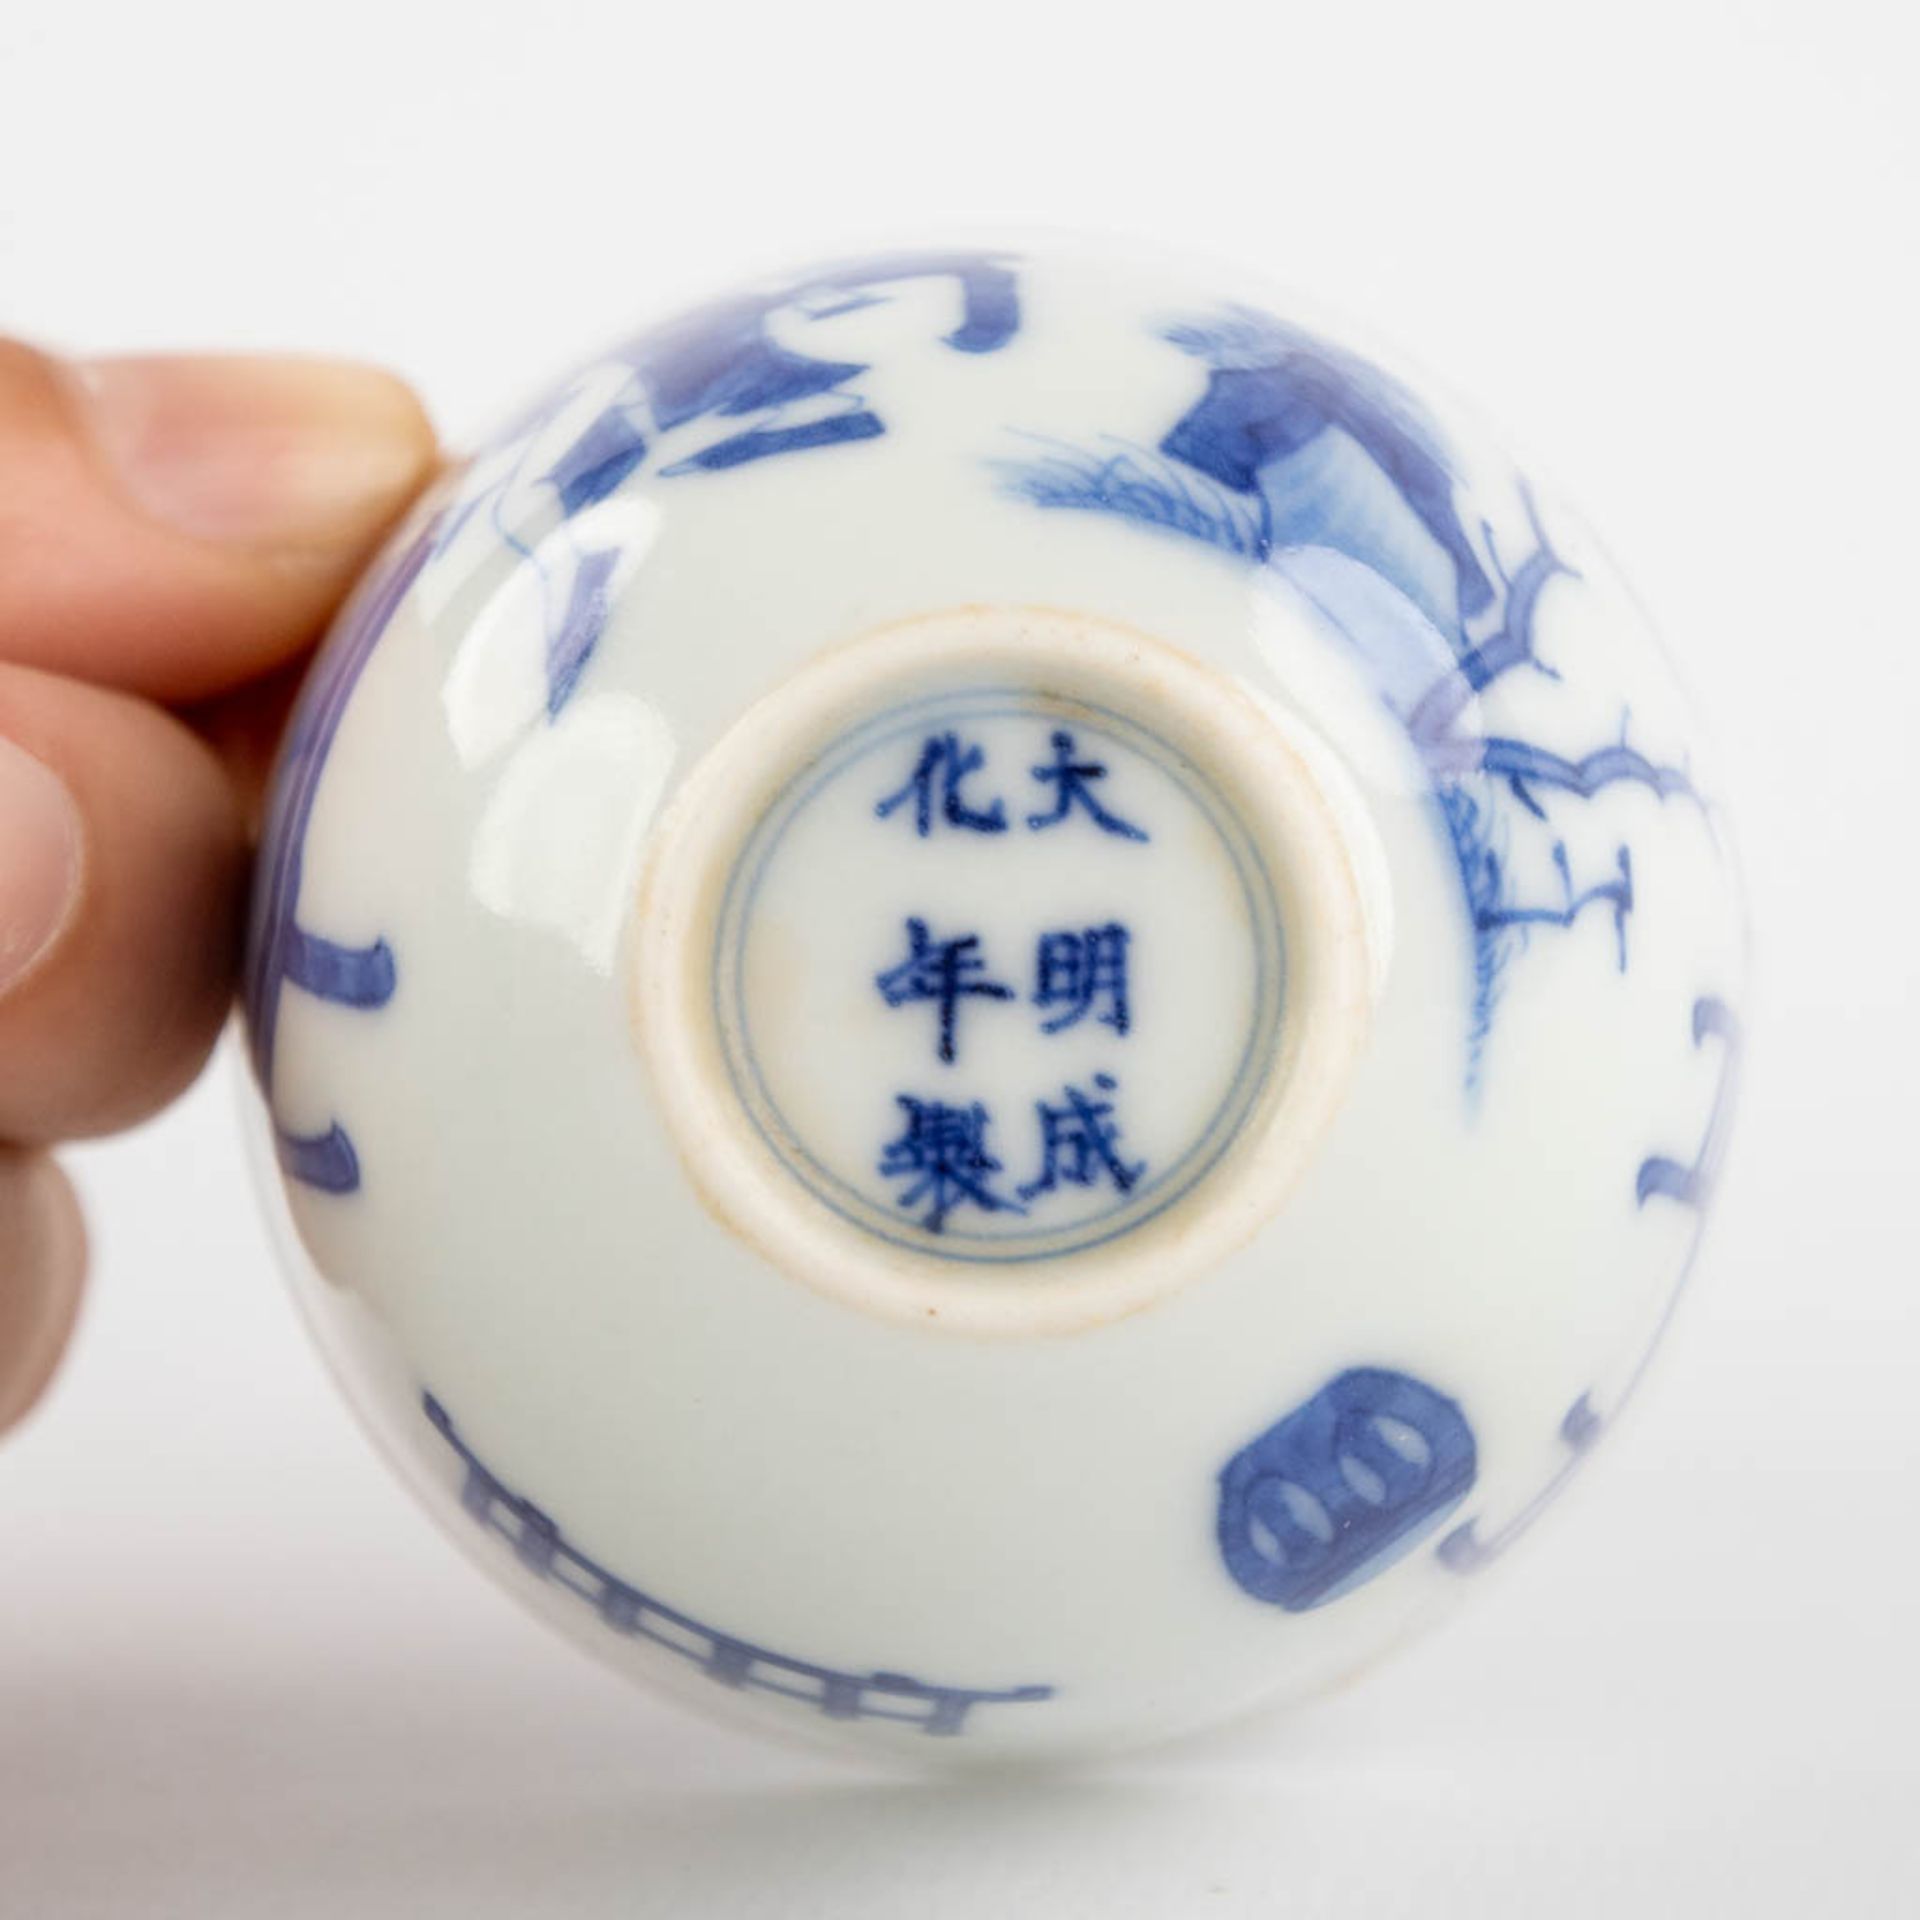 A small Chinese teacup with blue-white erotic scène, Chenghua mark, 19th/20th C. (H:4,5 x D:6,2 cm) - Image 9 of 11